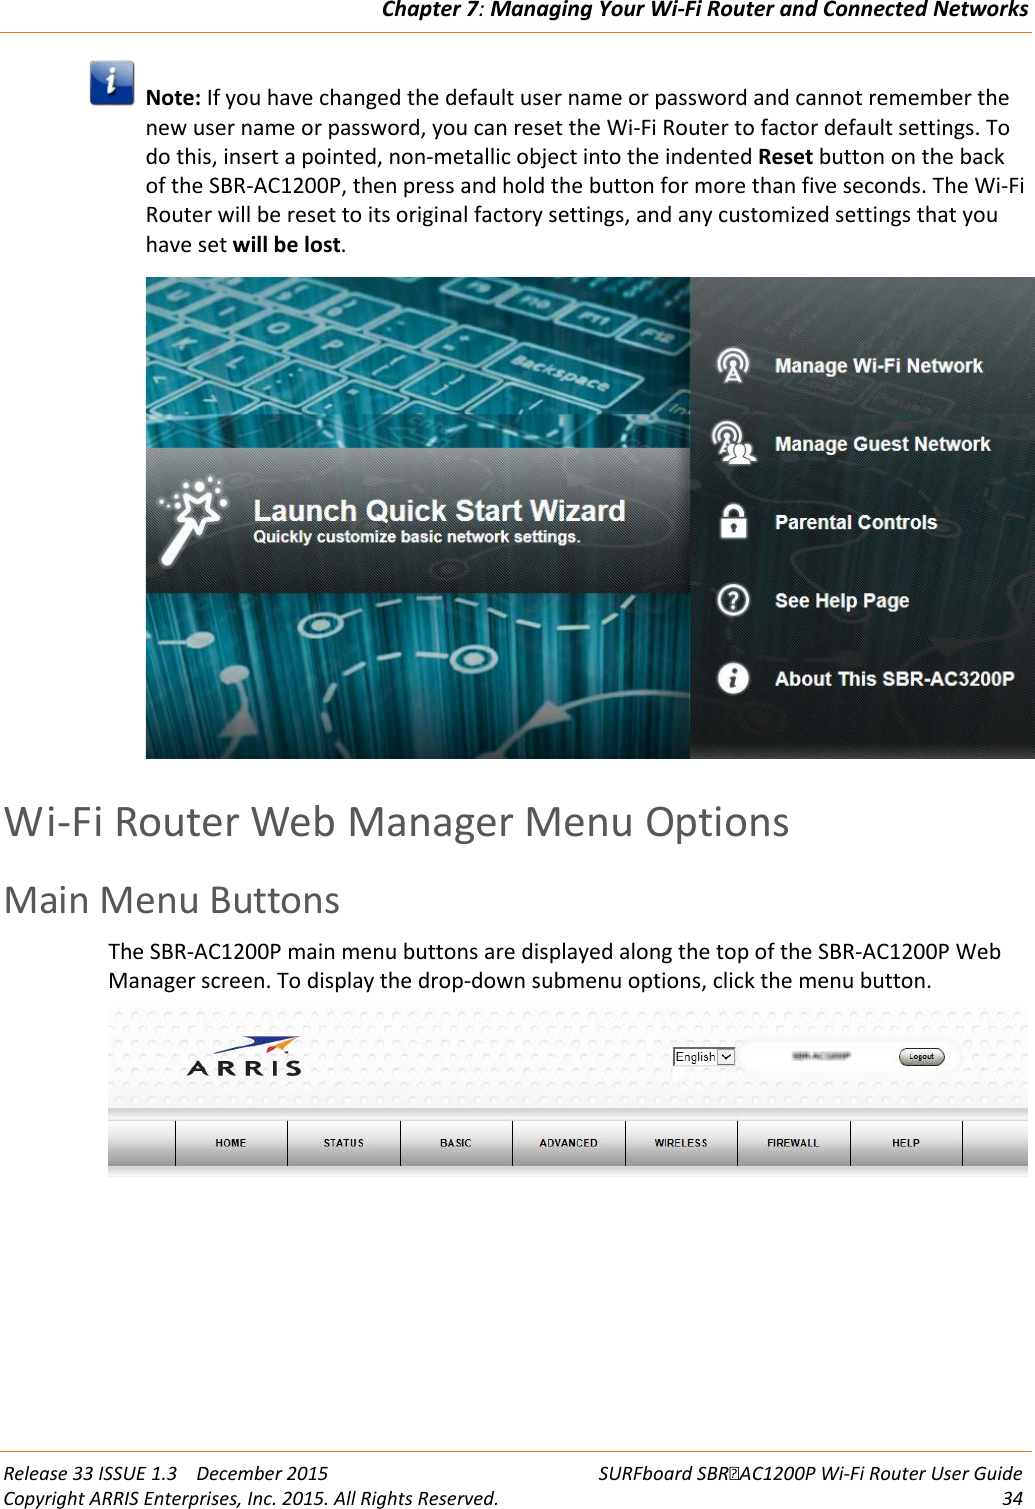 Chapter 7: Managing Your Wi-Fi Router and Connected Networks  Release 33 ISSUE 1.3    December 2015 SURFboard SBRAC1200P Wi-Fi Router User Guide Copyright ARRIS Enterprises, Inc. 2015. All Rights Reserved. 34   Note: If you have changed the default user name or password and cannot remember the new user name or password, you can reset the Wi-Fi Router to factor default settings. To do this, insert a pointed, non-metallic object into the indented Reset button on the back of the SBR-AC1200P, then press and hold the button for more than five seconds. The Wi-Fi Router will be reset to its original factory settings, and any customized settings that you have set will be lost.    Wi-Fi Router Web Manager Menu Options Main Menu Buttons The SBR-AC1200P main menu buttons are displayed along the top of the SBR-AC1200P Web Manager screen. To display the drop-down submenu options, click the menu button.    